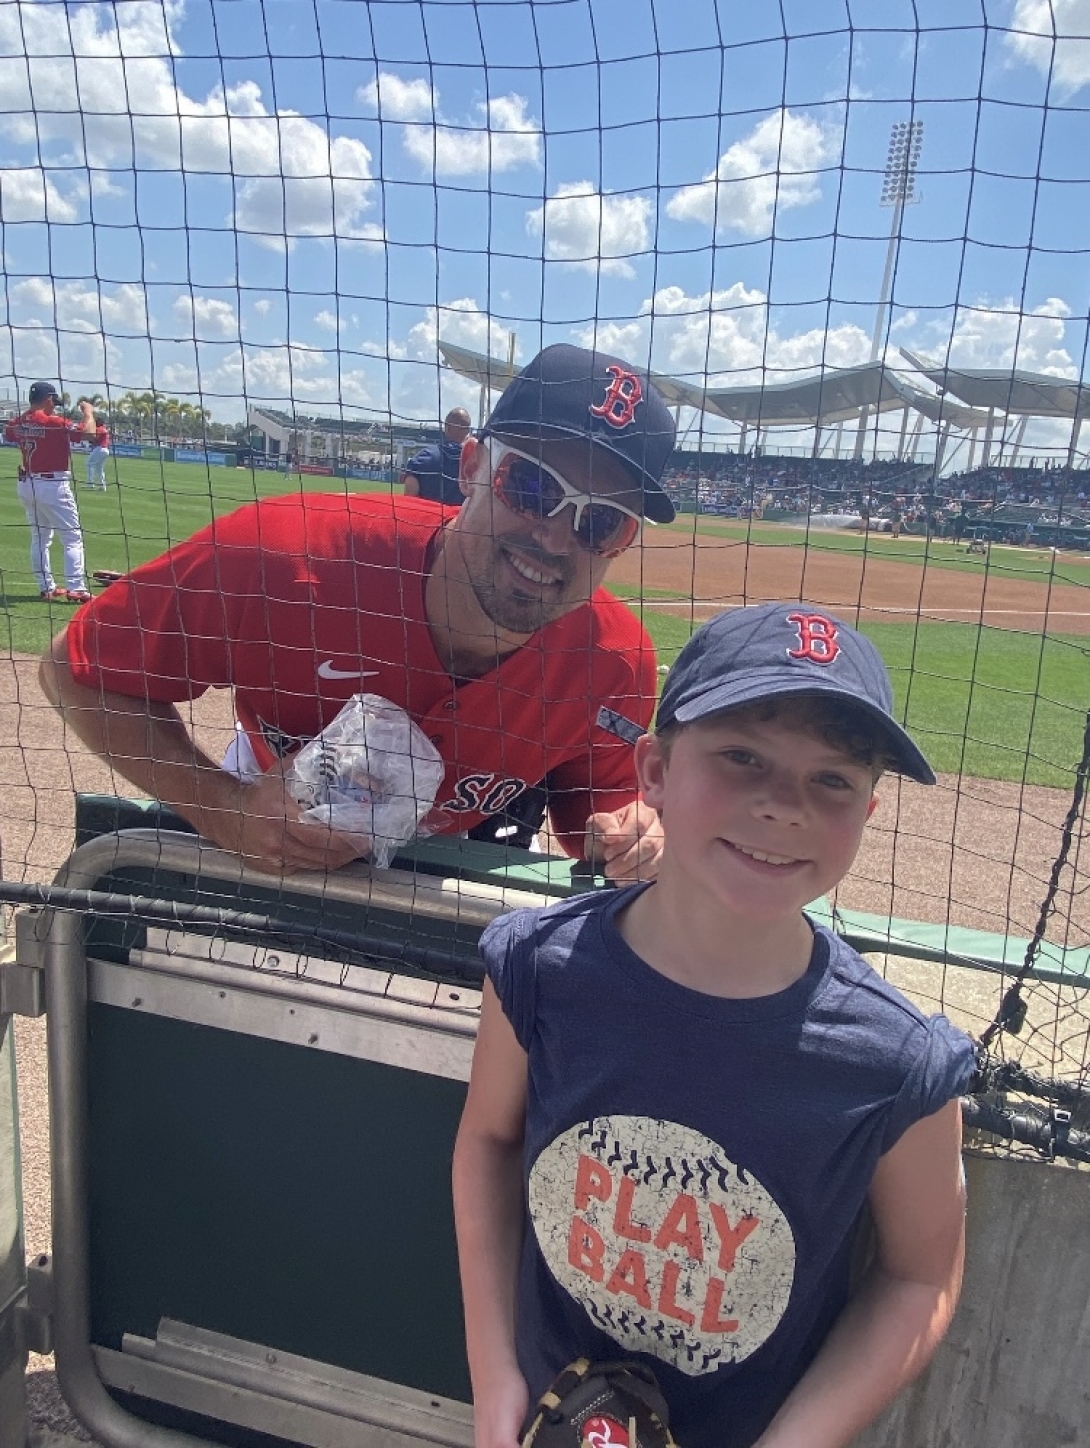 boston red sox player with boy in red sox hat smiling outside at baseball field